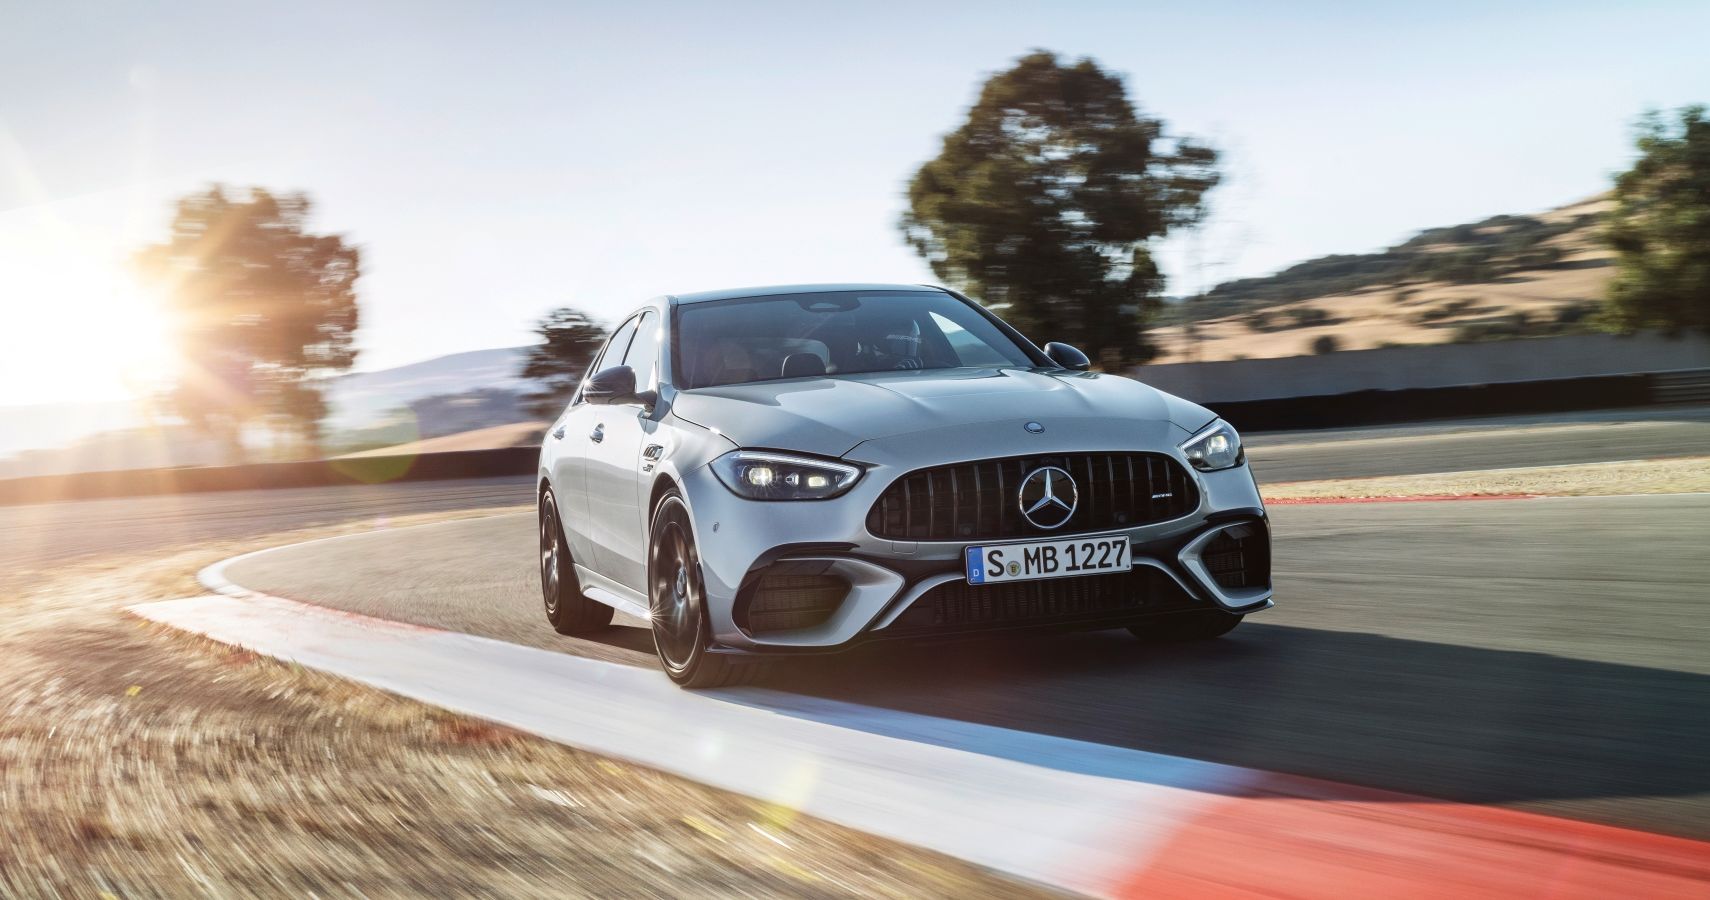 Mercedes-AMG C 63 S Hybrid Front View On Track